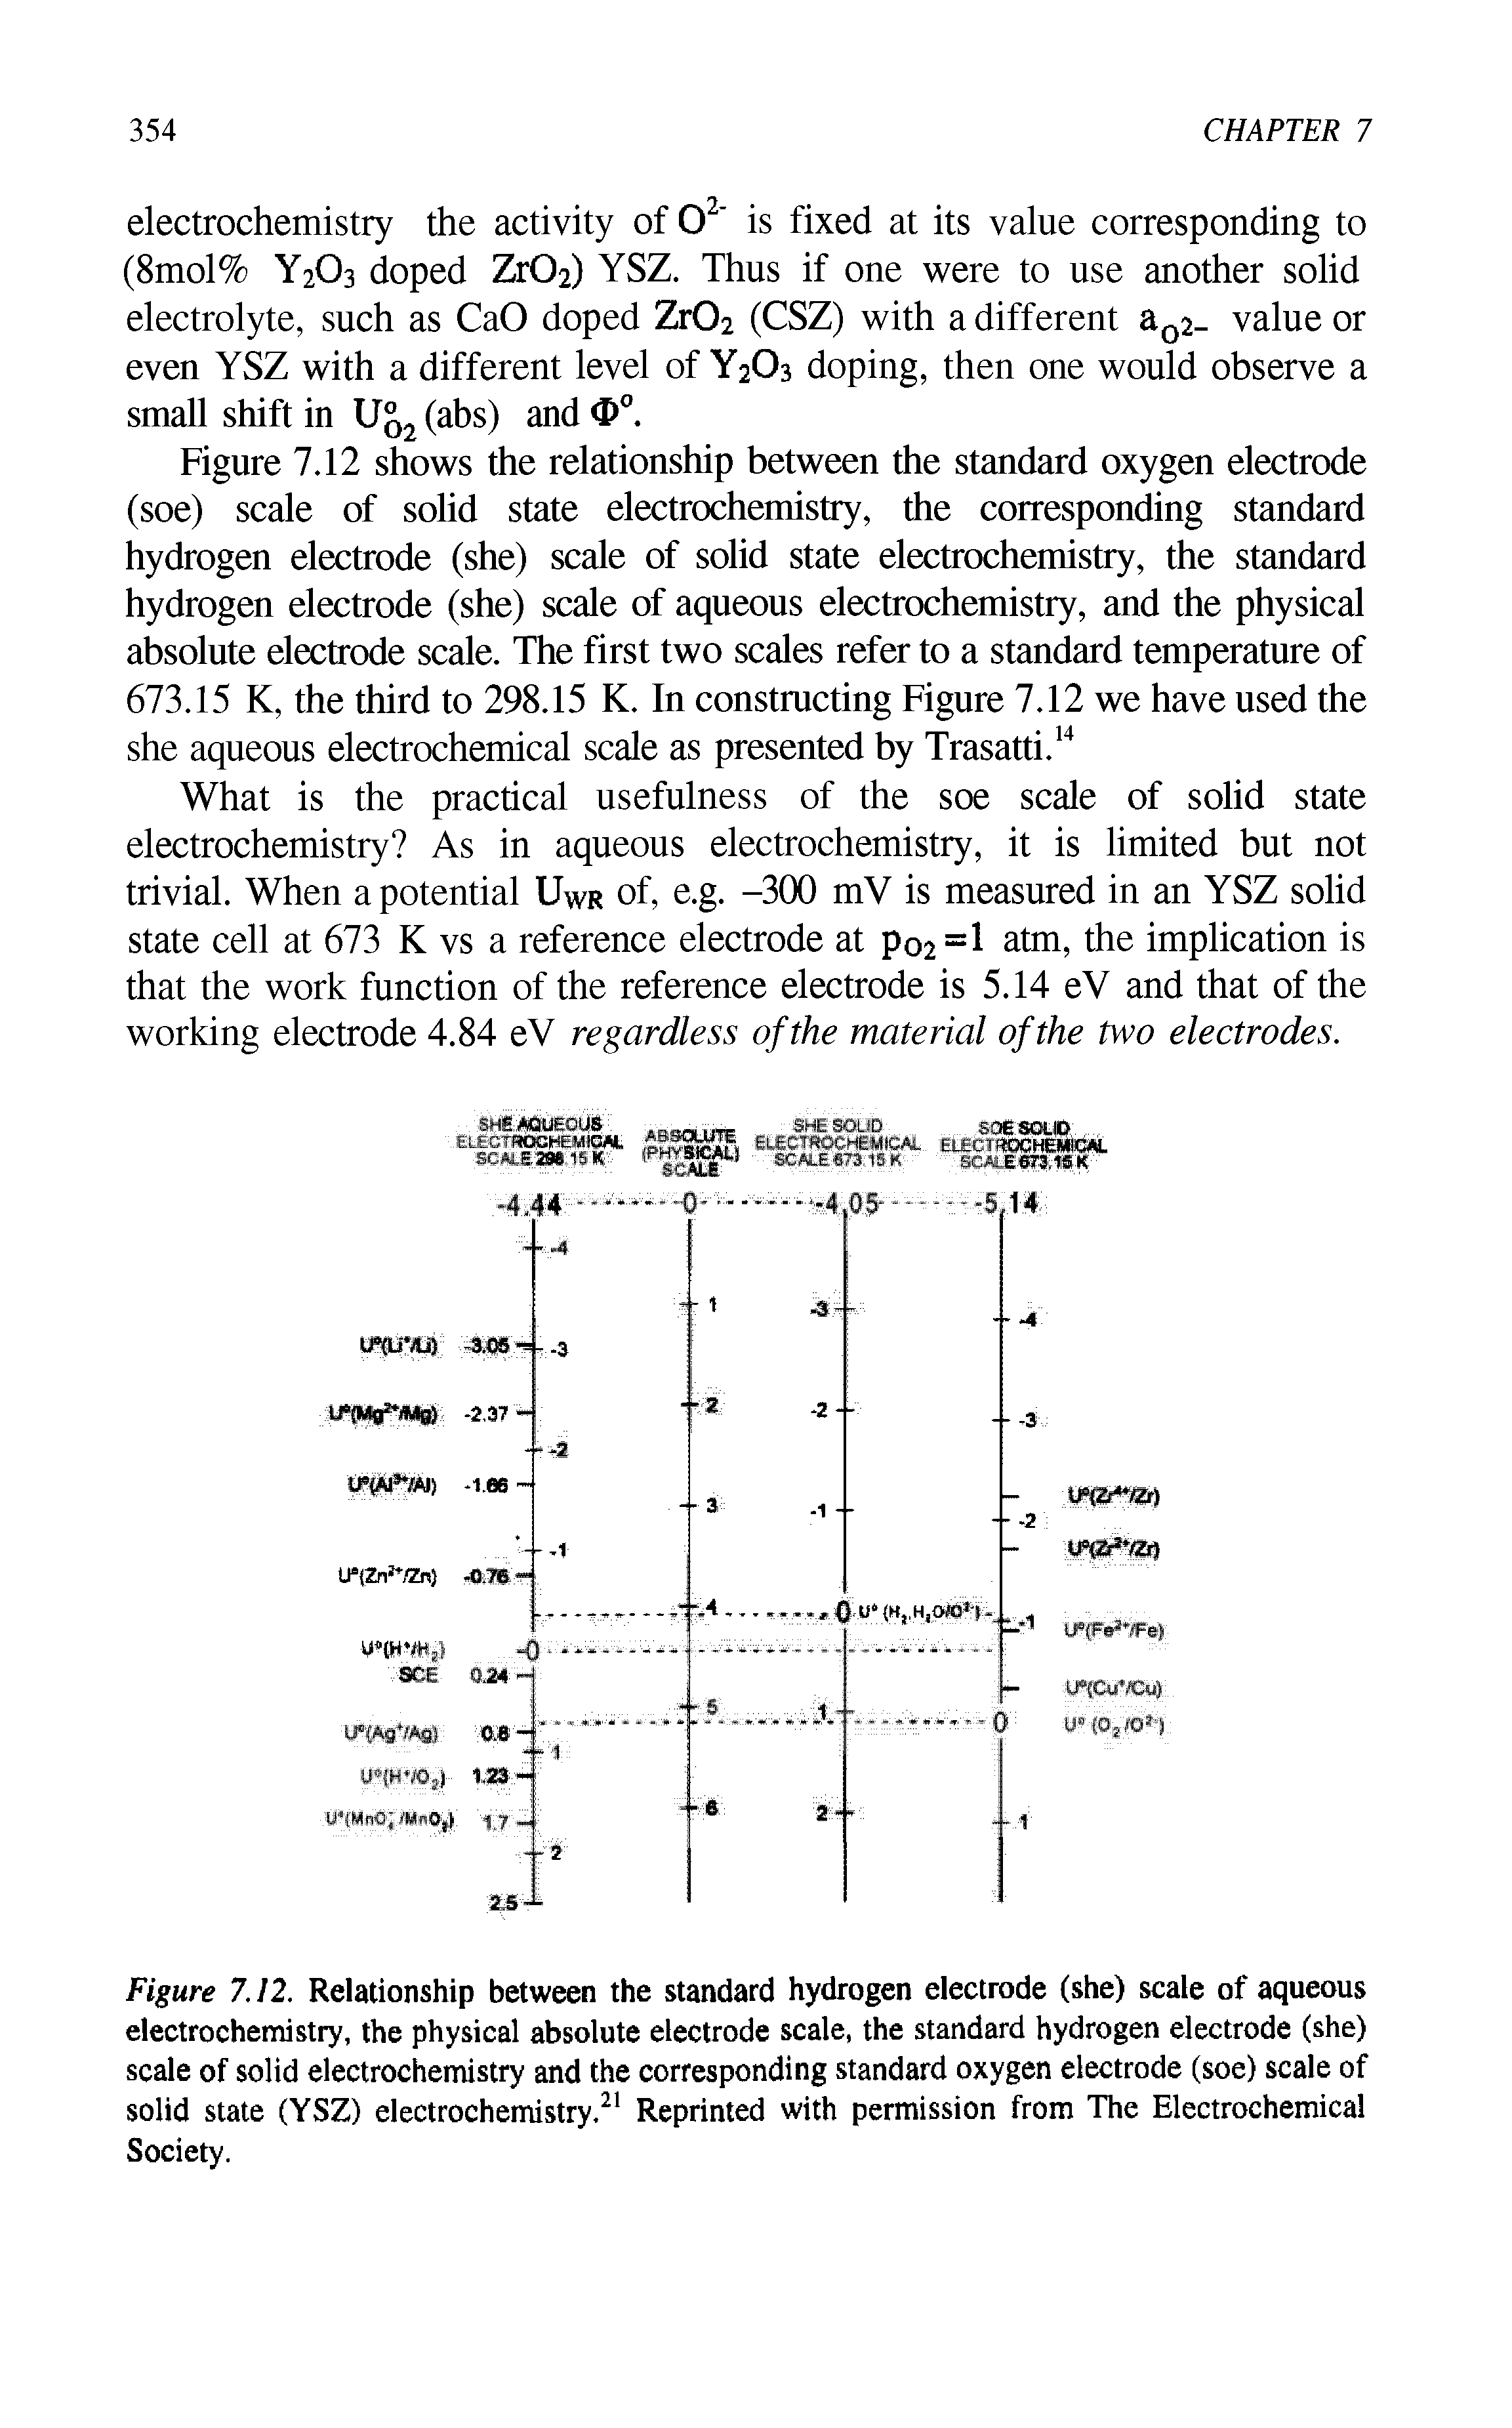 Figure 7.12. Relationship between the standard hydrogen electrode (she) scale of aqueous electrochemistry, the physical absolute electrode scale, the standard hydrogen electrode (she) scale of solid electrochemistry and the corresponding standard oxygen electrode (soe) scale of solid state (YSZ) electrochemistry.21 Reprinted with permission from The Electrochemical Society.